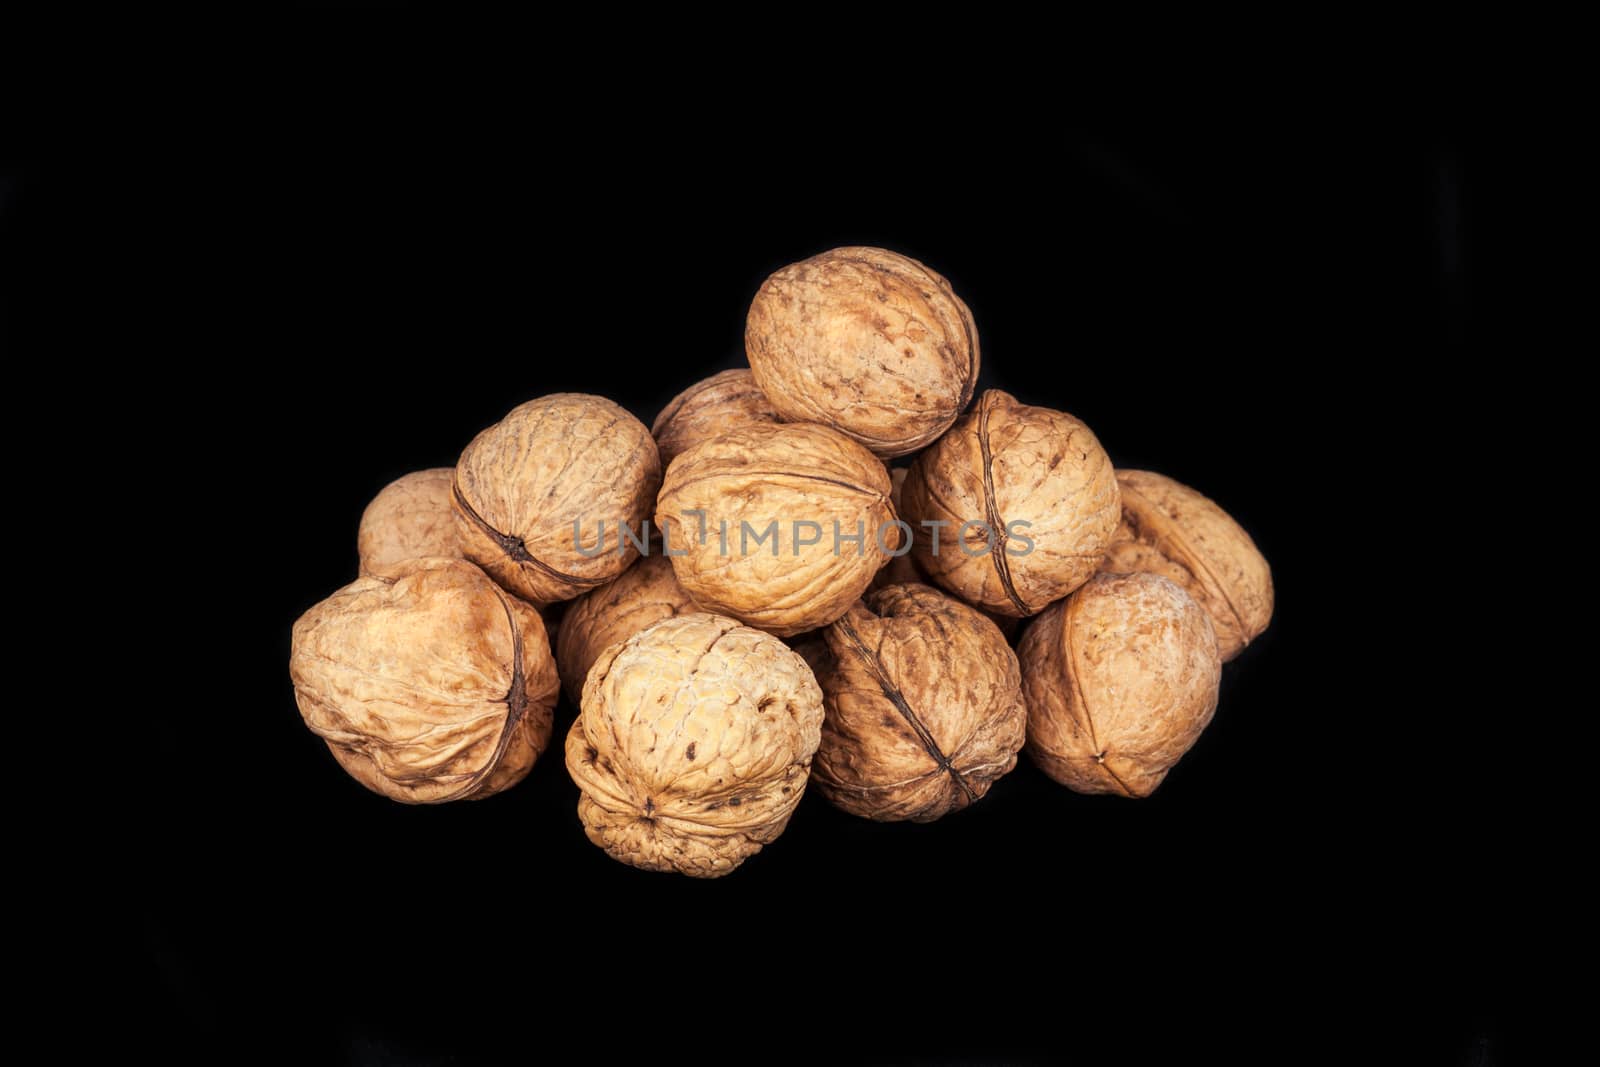 A pile of walnuts on black background by shoricelu